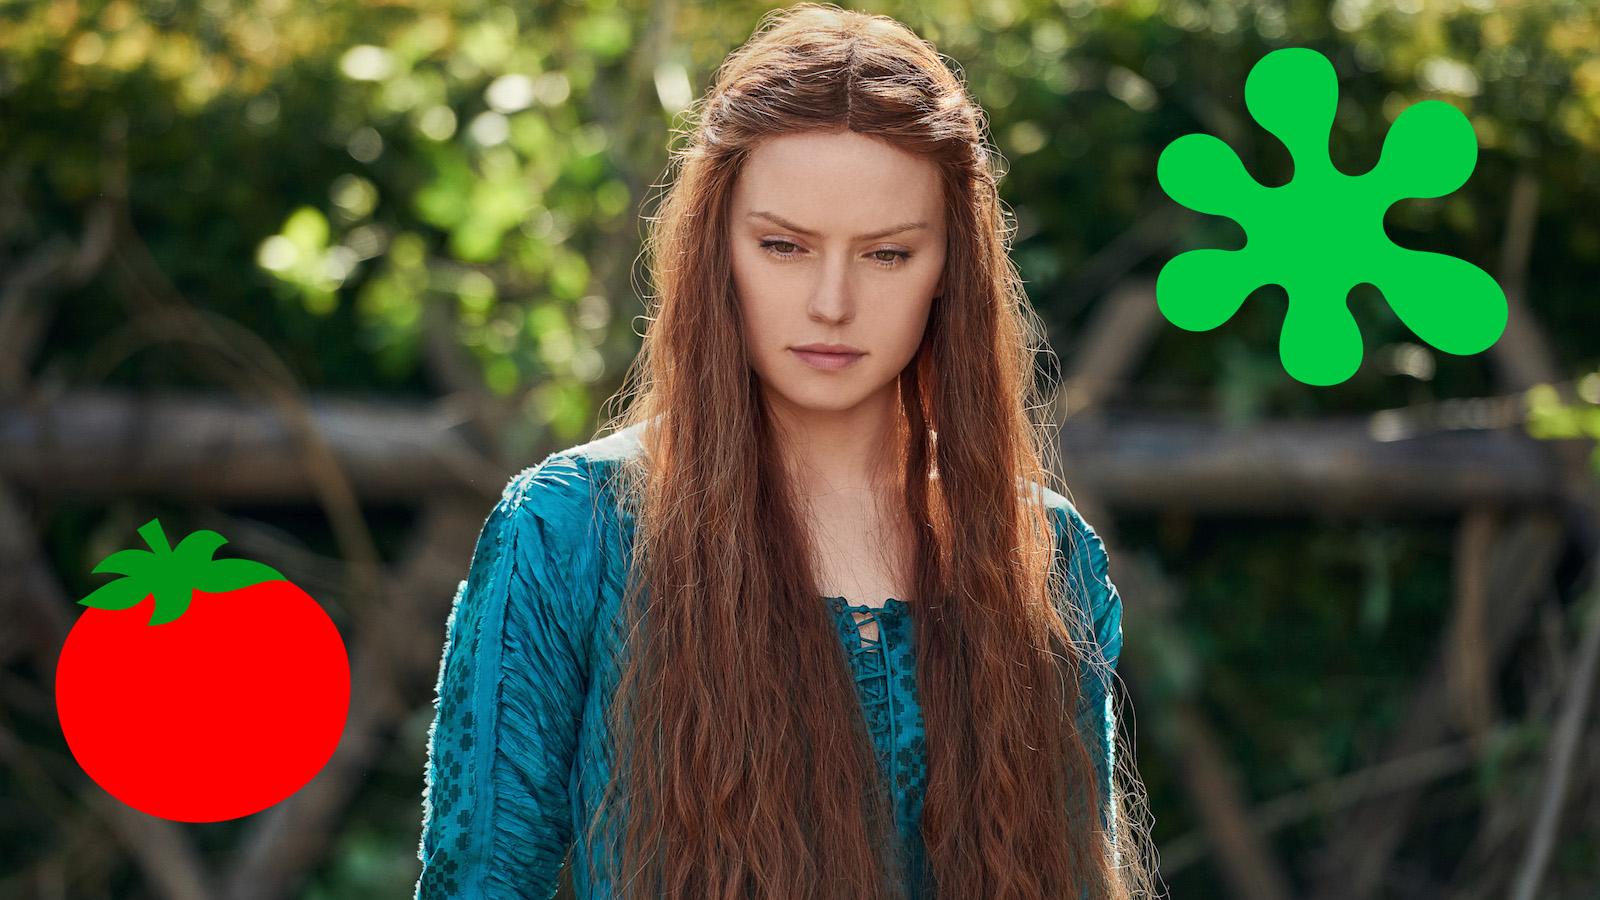 Daisy Ridley appears in the 2018 film Ophelia, alongside the Rotten Tomatoes Fresh and Rotten logos